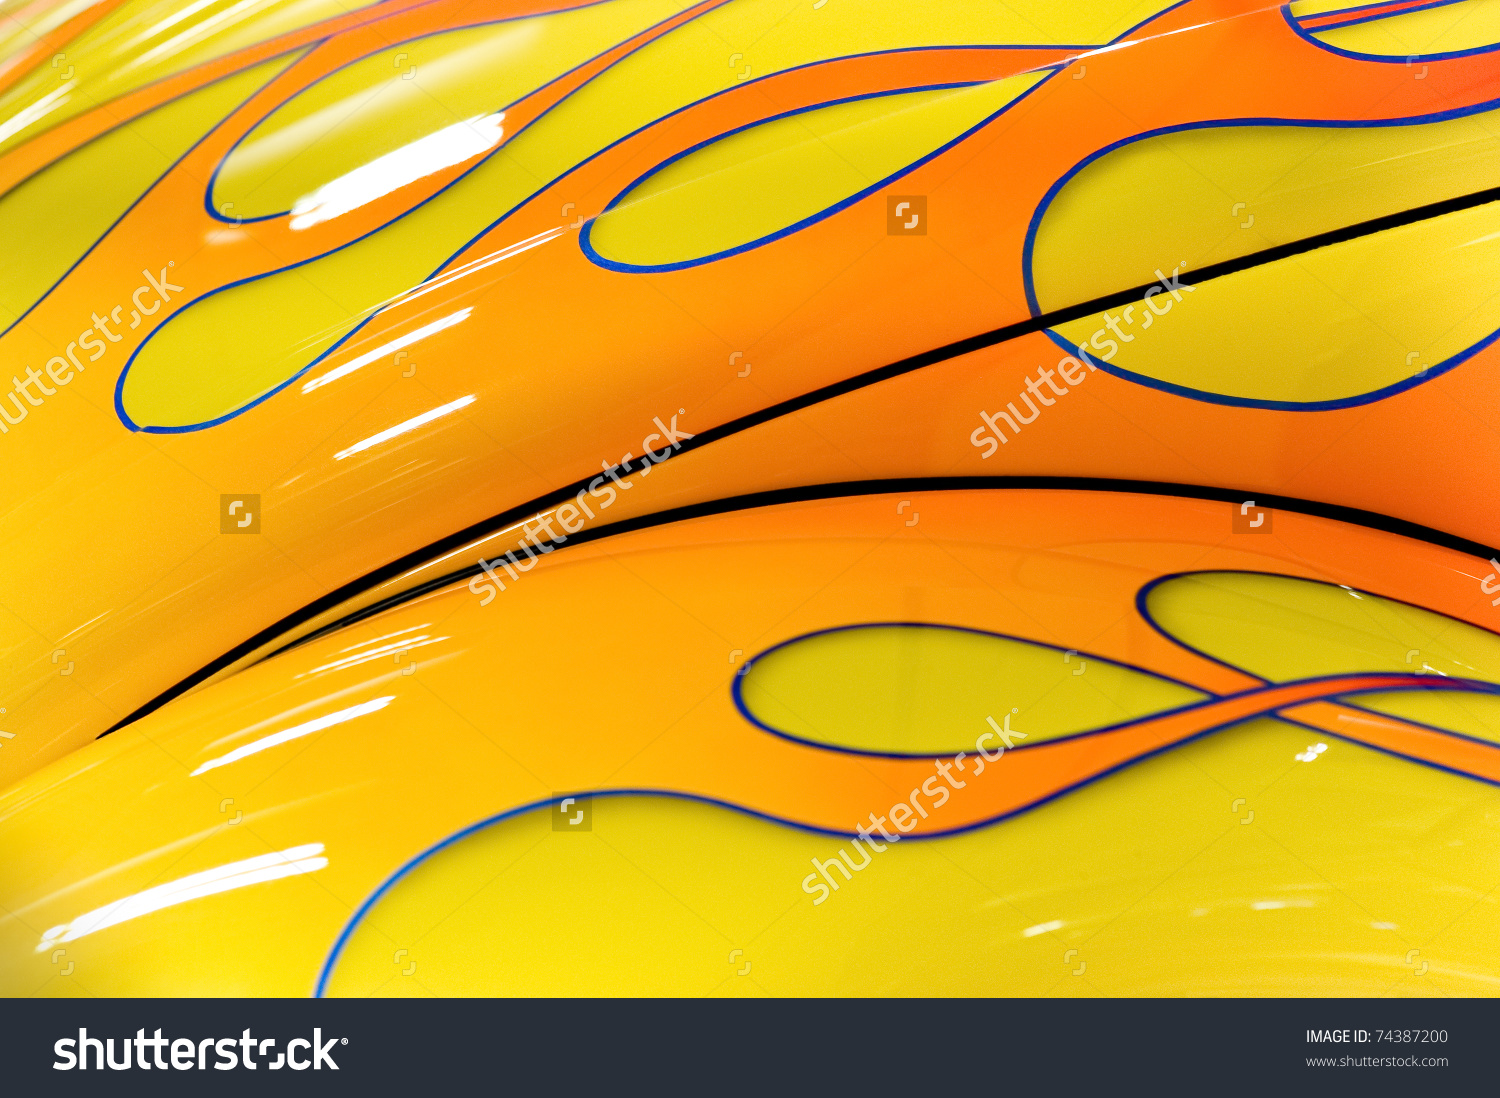 Colorful Flaming Paintwork On A Custom Hotrod Vehicle Stock Photo.